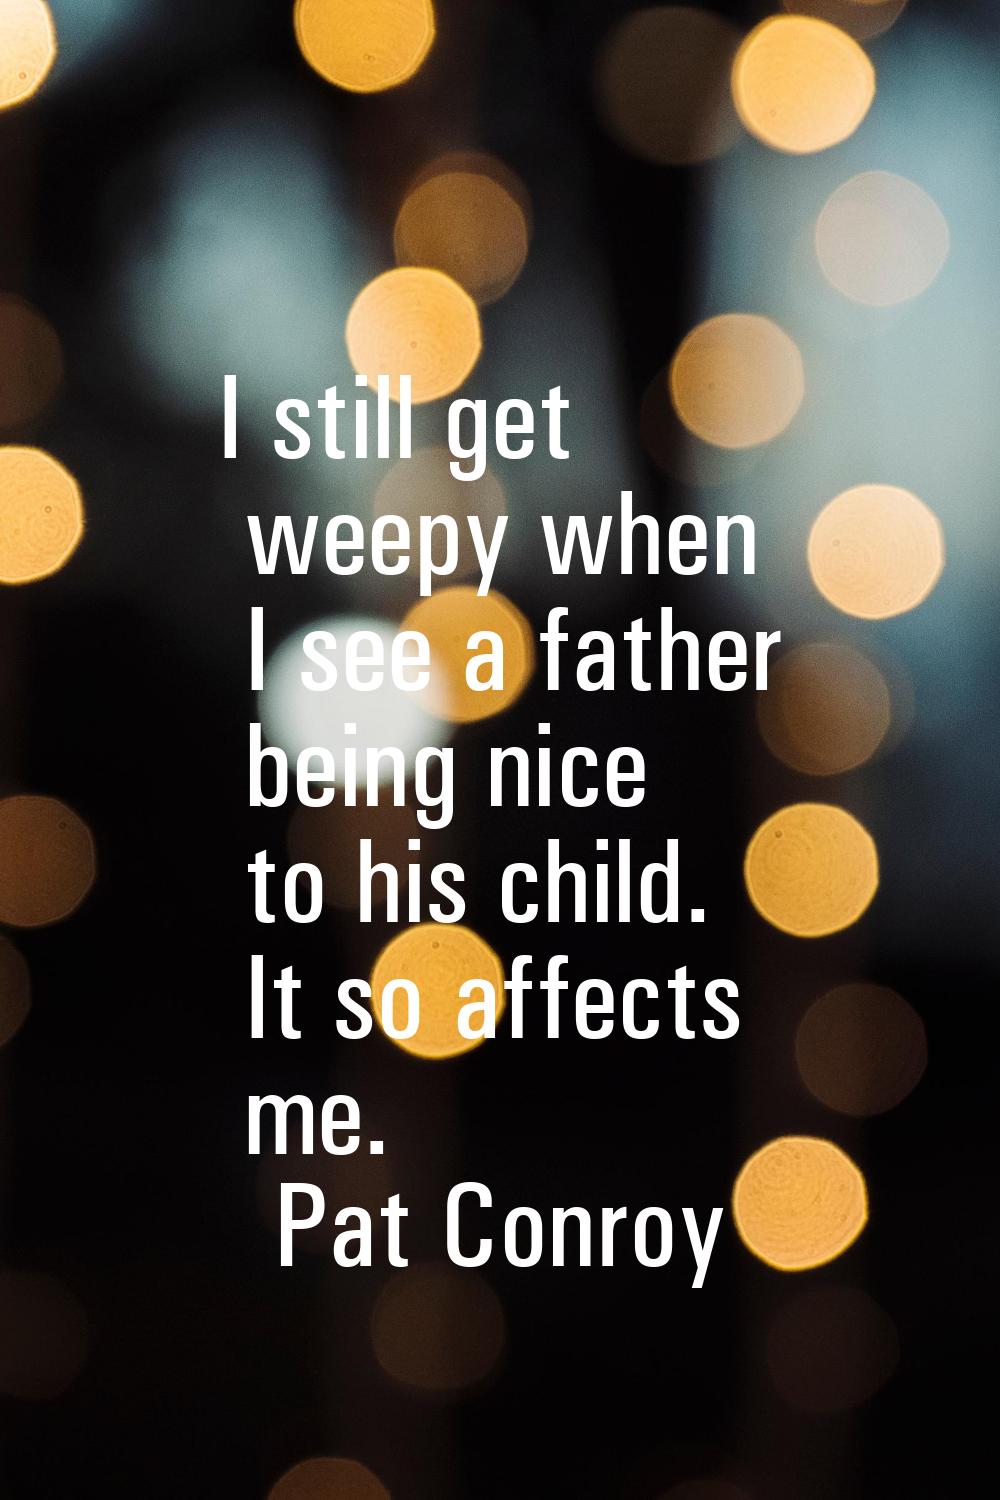 I still get weepy when I see a father being nice to his child. It so affects me.